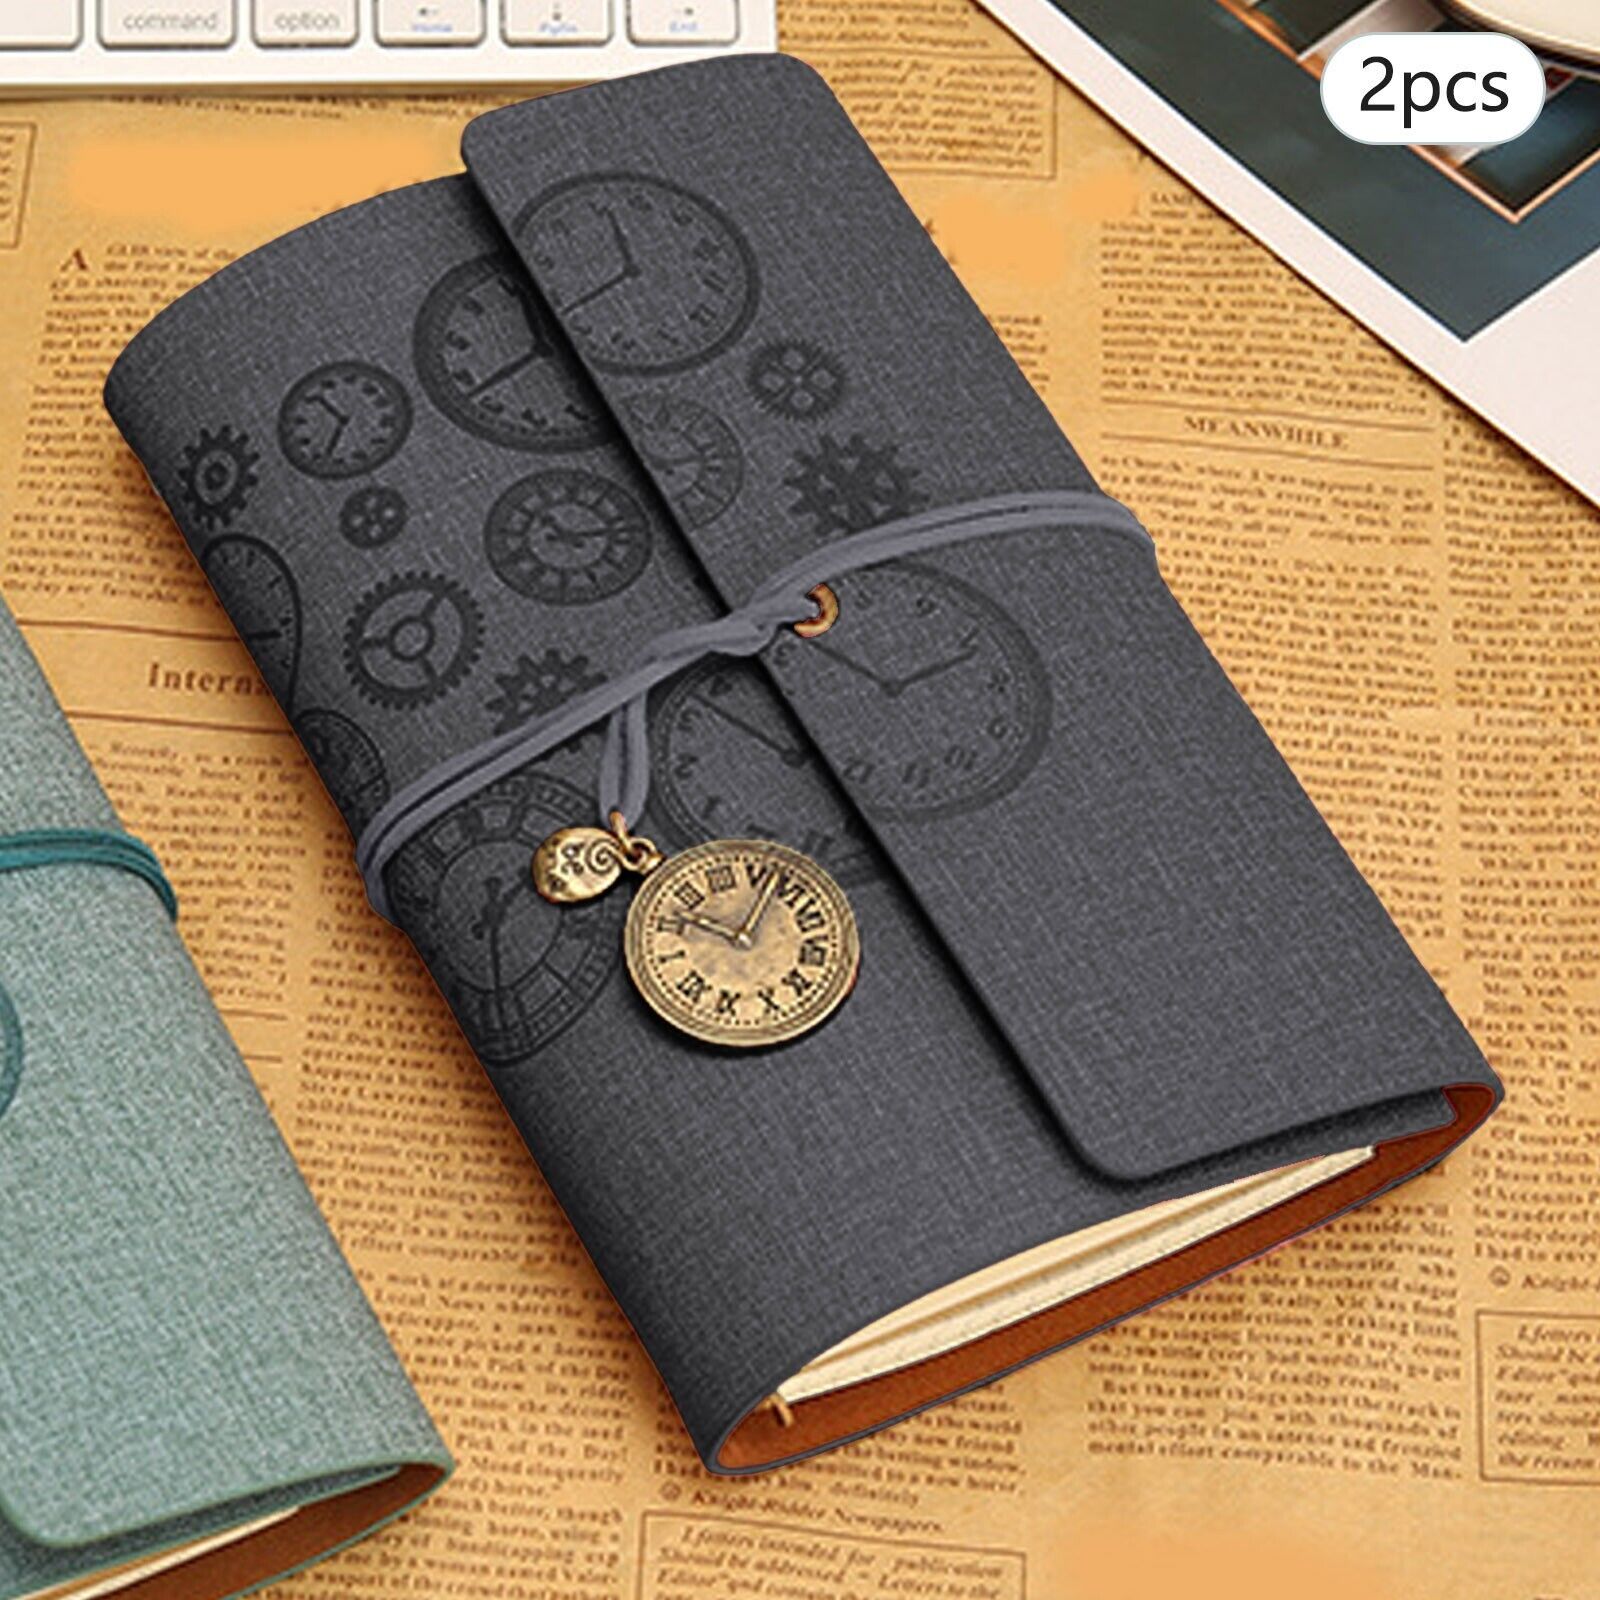 Gt 2000 9 2PCS A6 Loose Leaf Vintage Style Binding Creative Ledger Diary